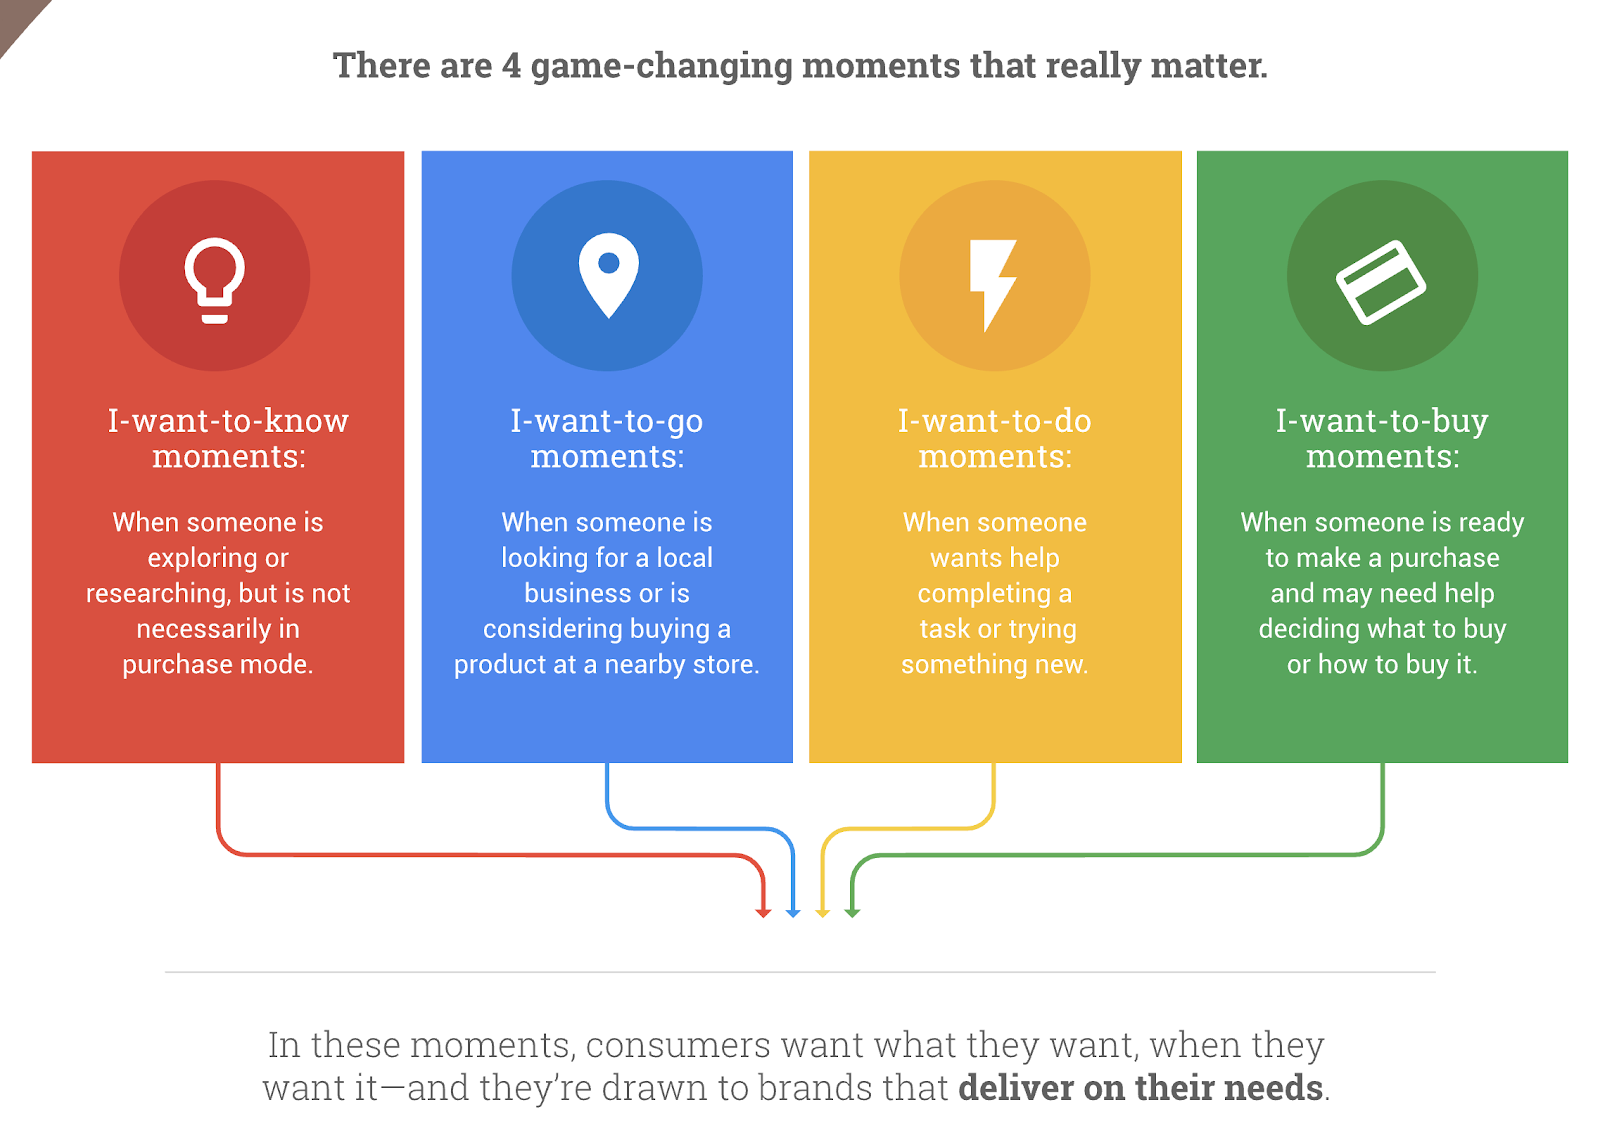 4 game-changing micro-moments